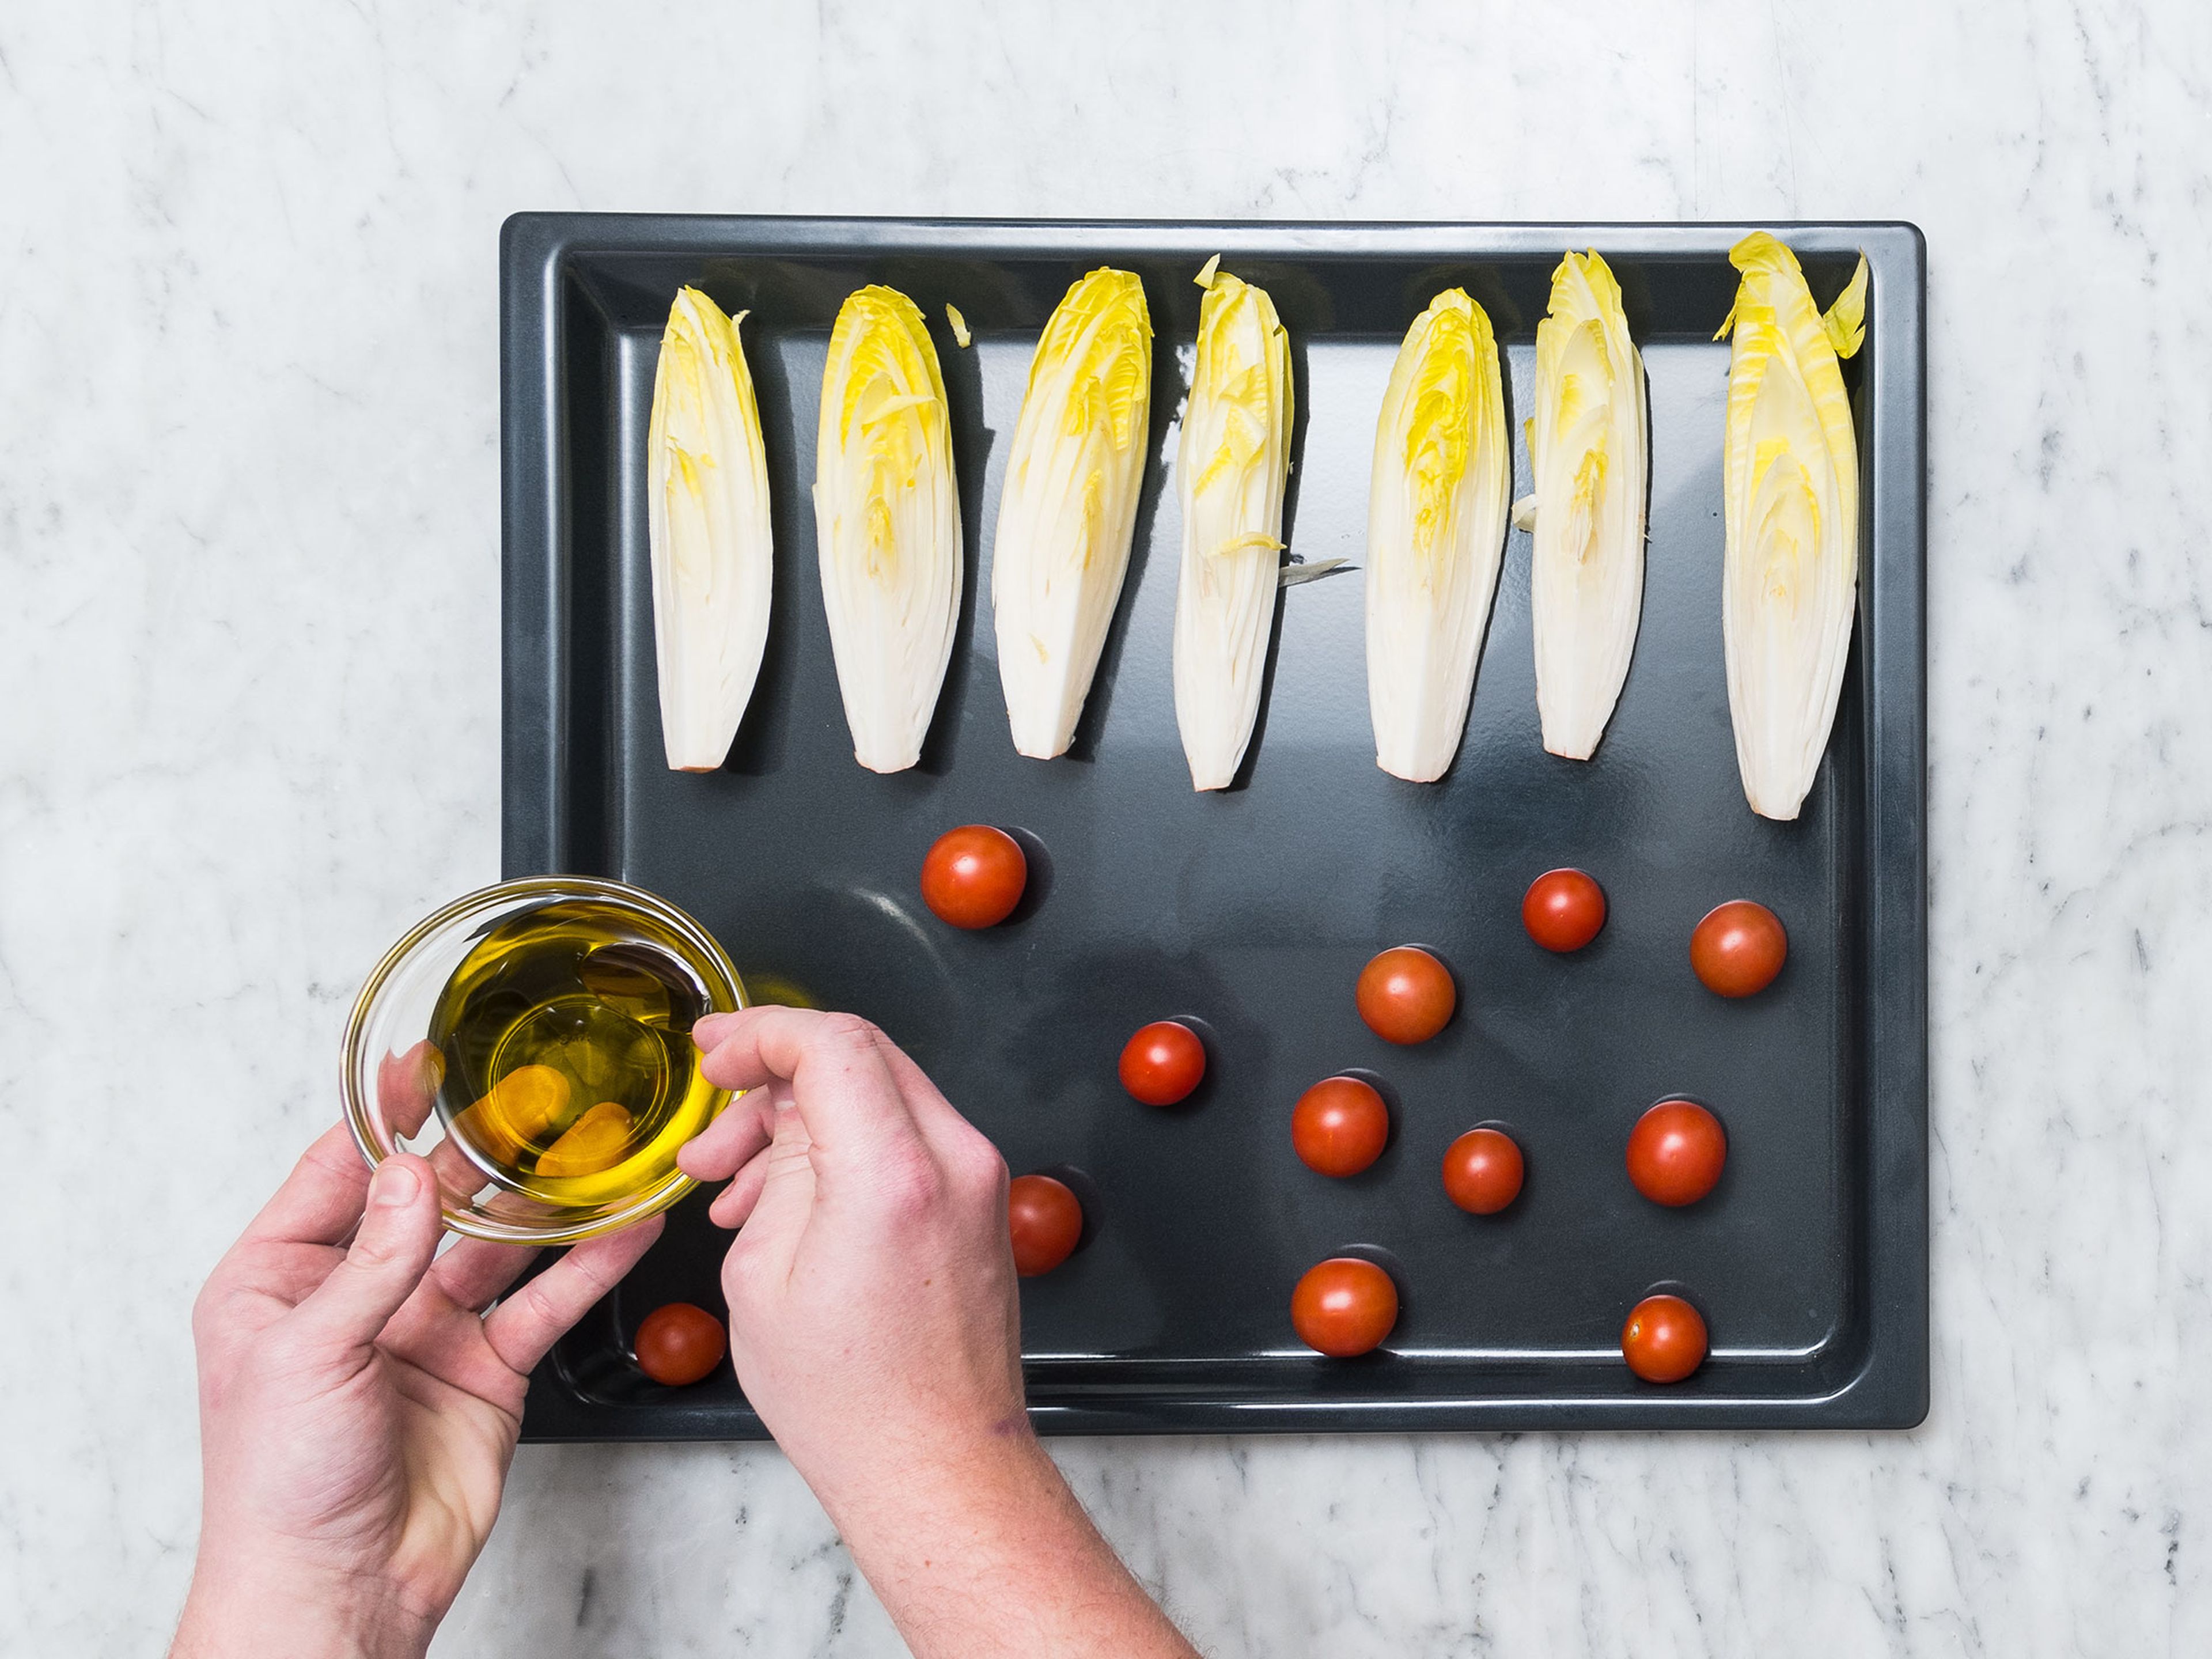 Pre-heat oven to 180°C/350°F. Wash endive and quarter. Transfer endive and tomatoes onto a baking sheet, drizzle with some olive oil, and season with salt, pepper, and sugar to taste. Roast in oven for approx. 8 – 10 min.